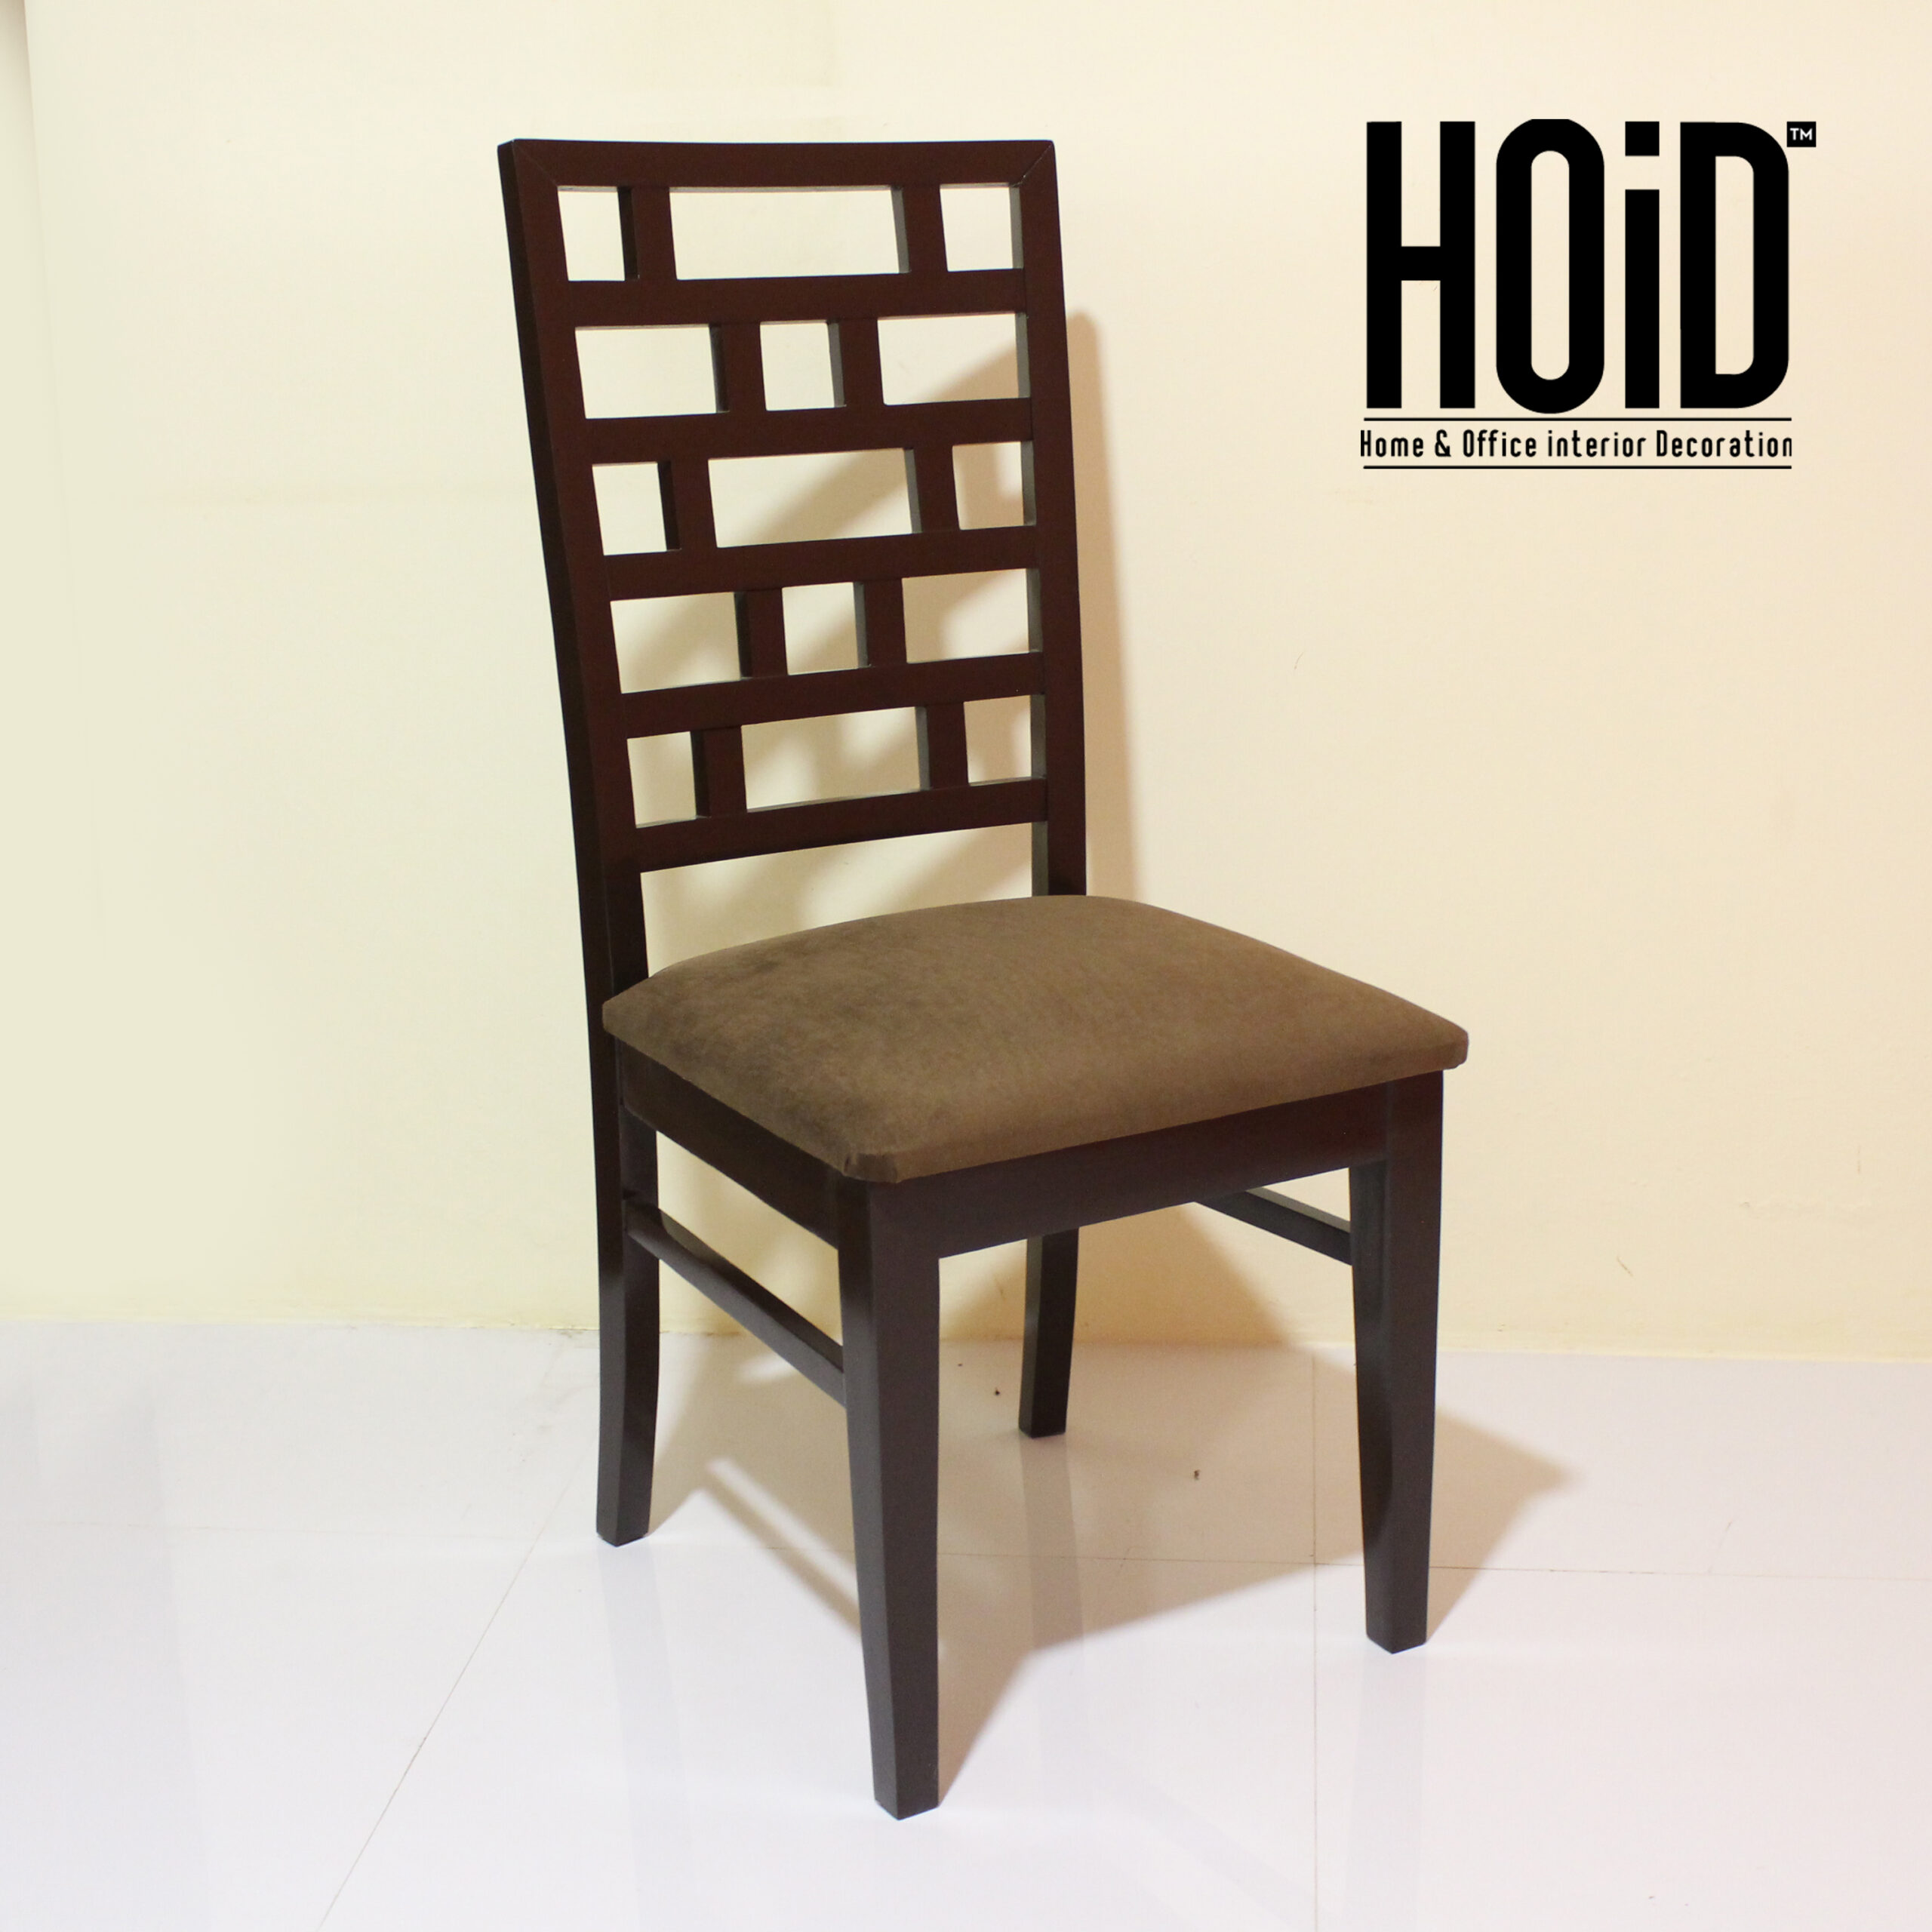 nosot-chair-scaled-2.jpg